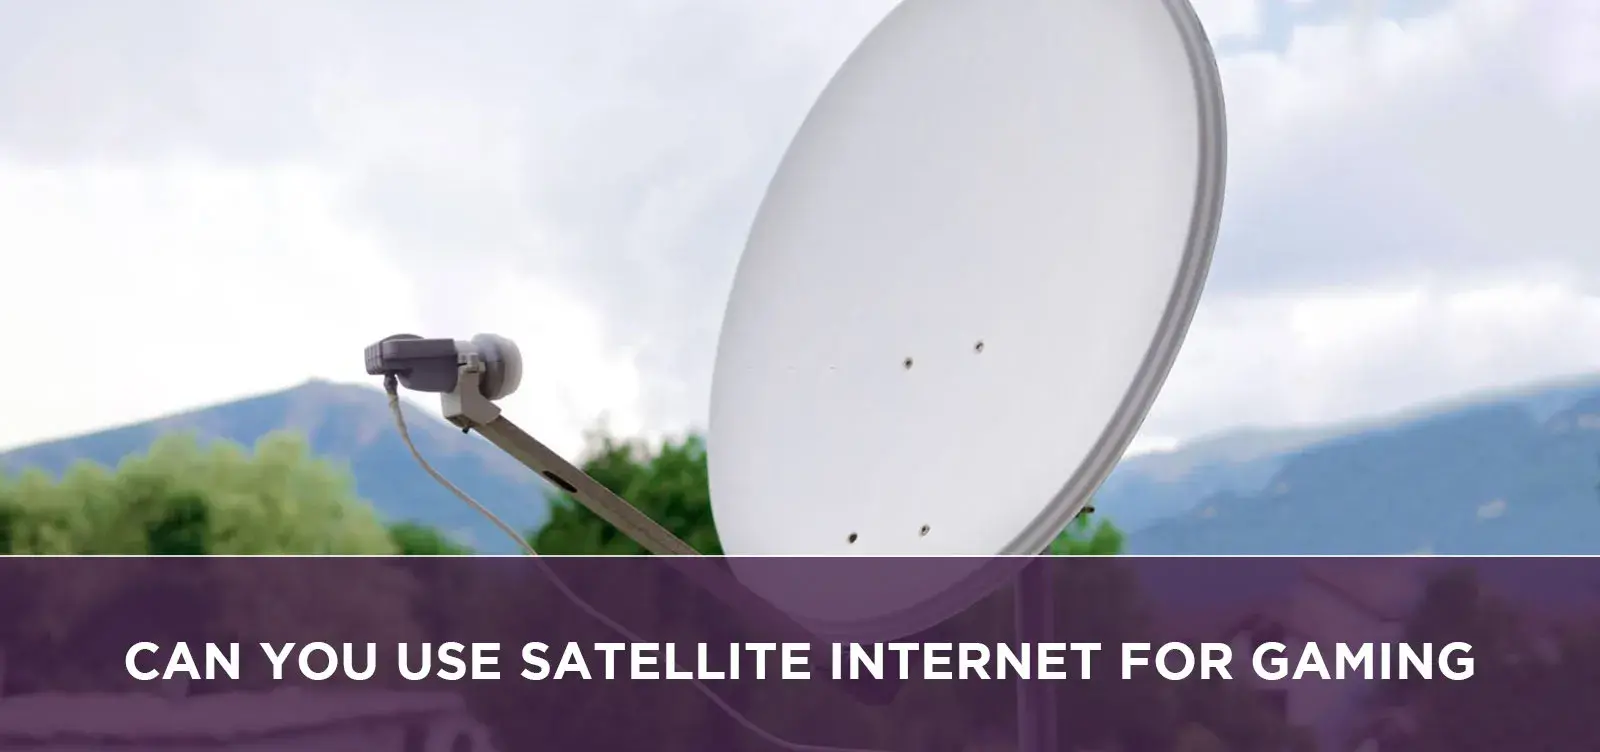 Can You Use Satellite Internet For Gaming?